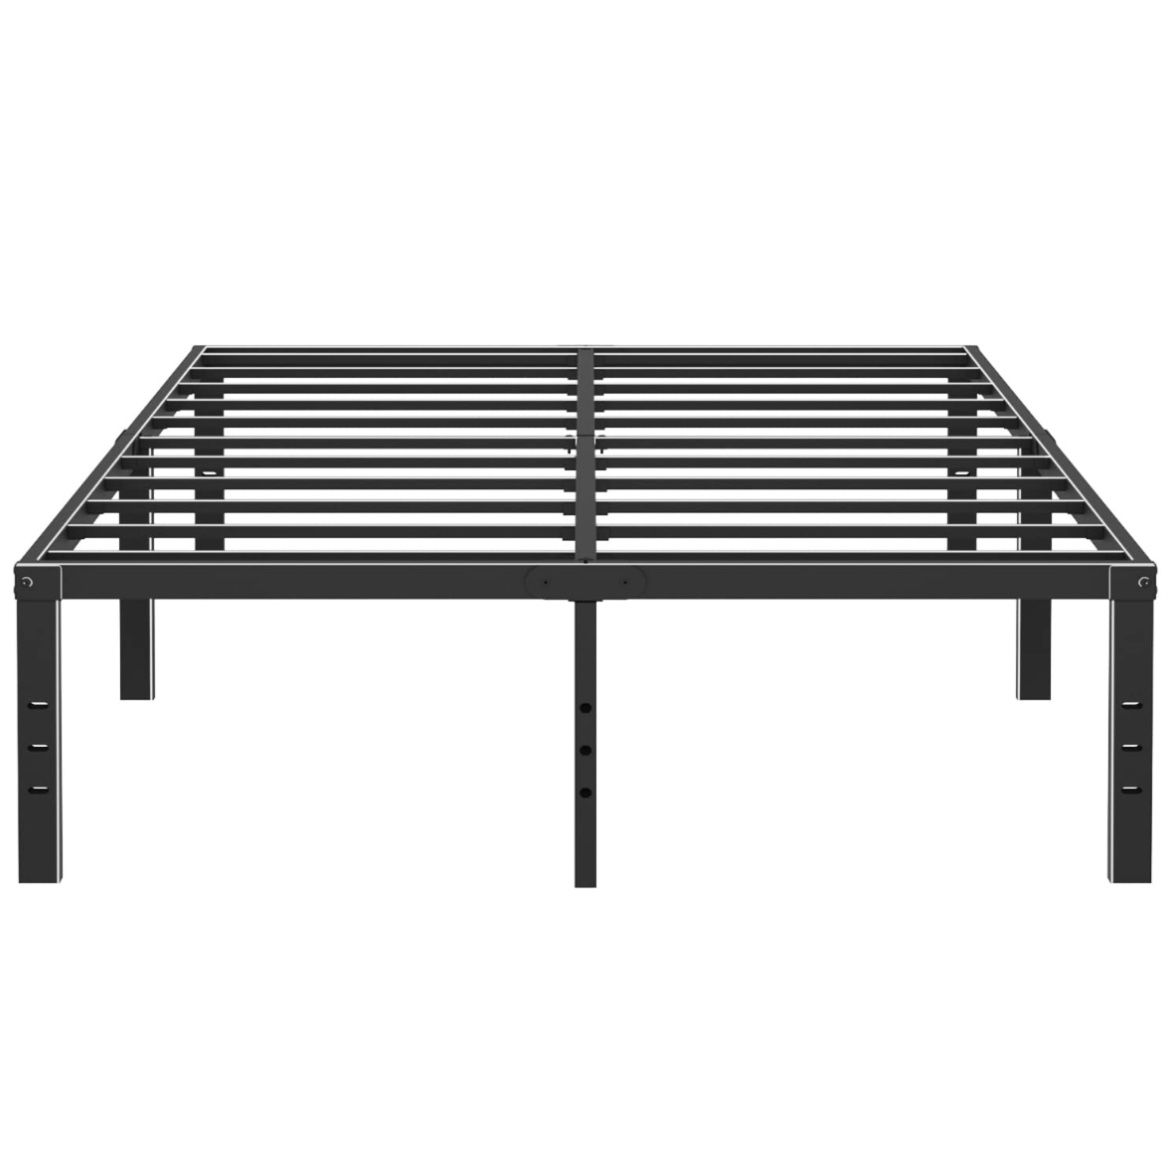 14”  QUEEN SIZE BED FRAME